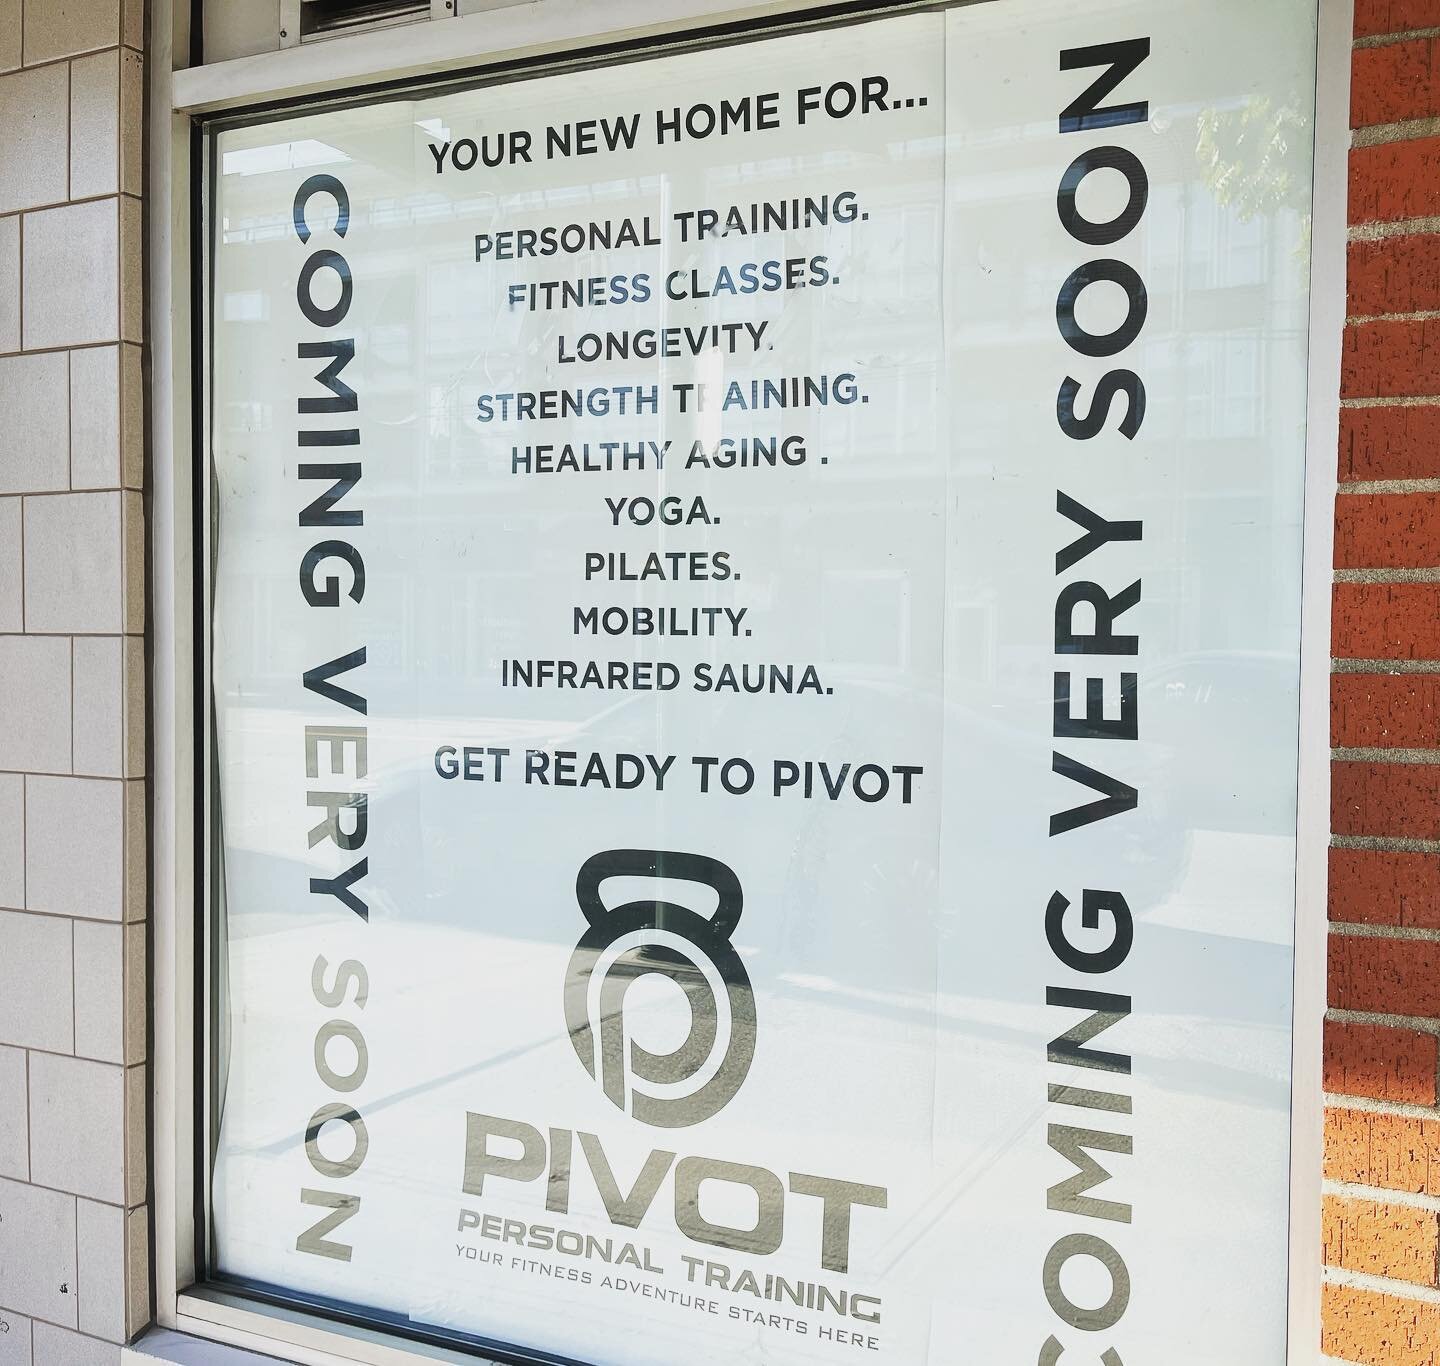 Getting excited about our new bigger and better home opening this fall&hellip;the renovations are under way 🔨 Stay tuned here for more classes all focused on longevity and energetic aging 💪